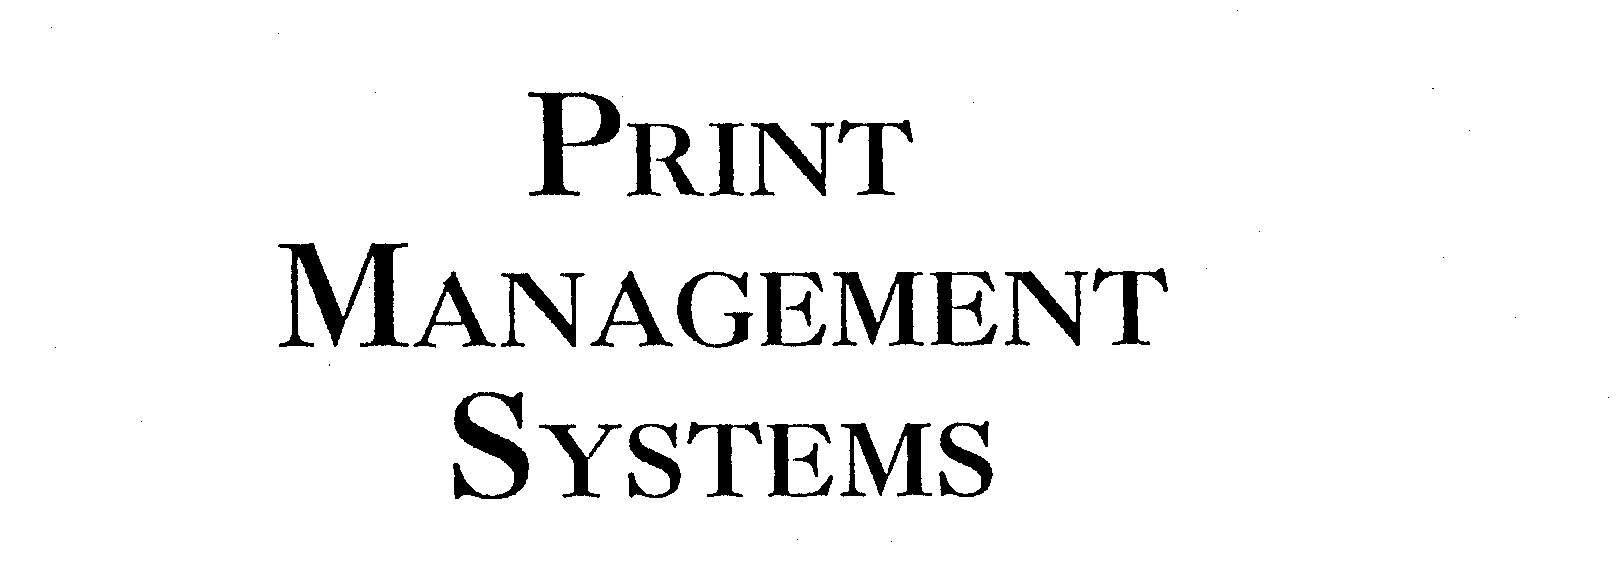  PRINT MANAGEMENT SYSTEMS